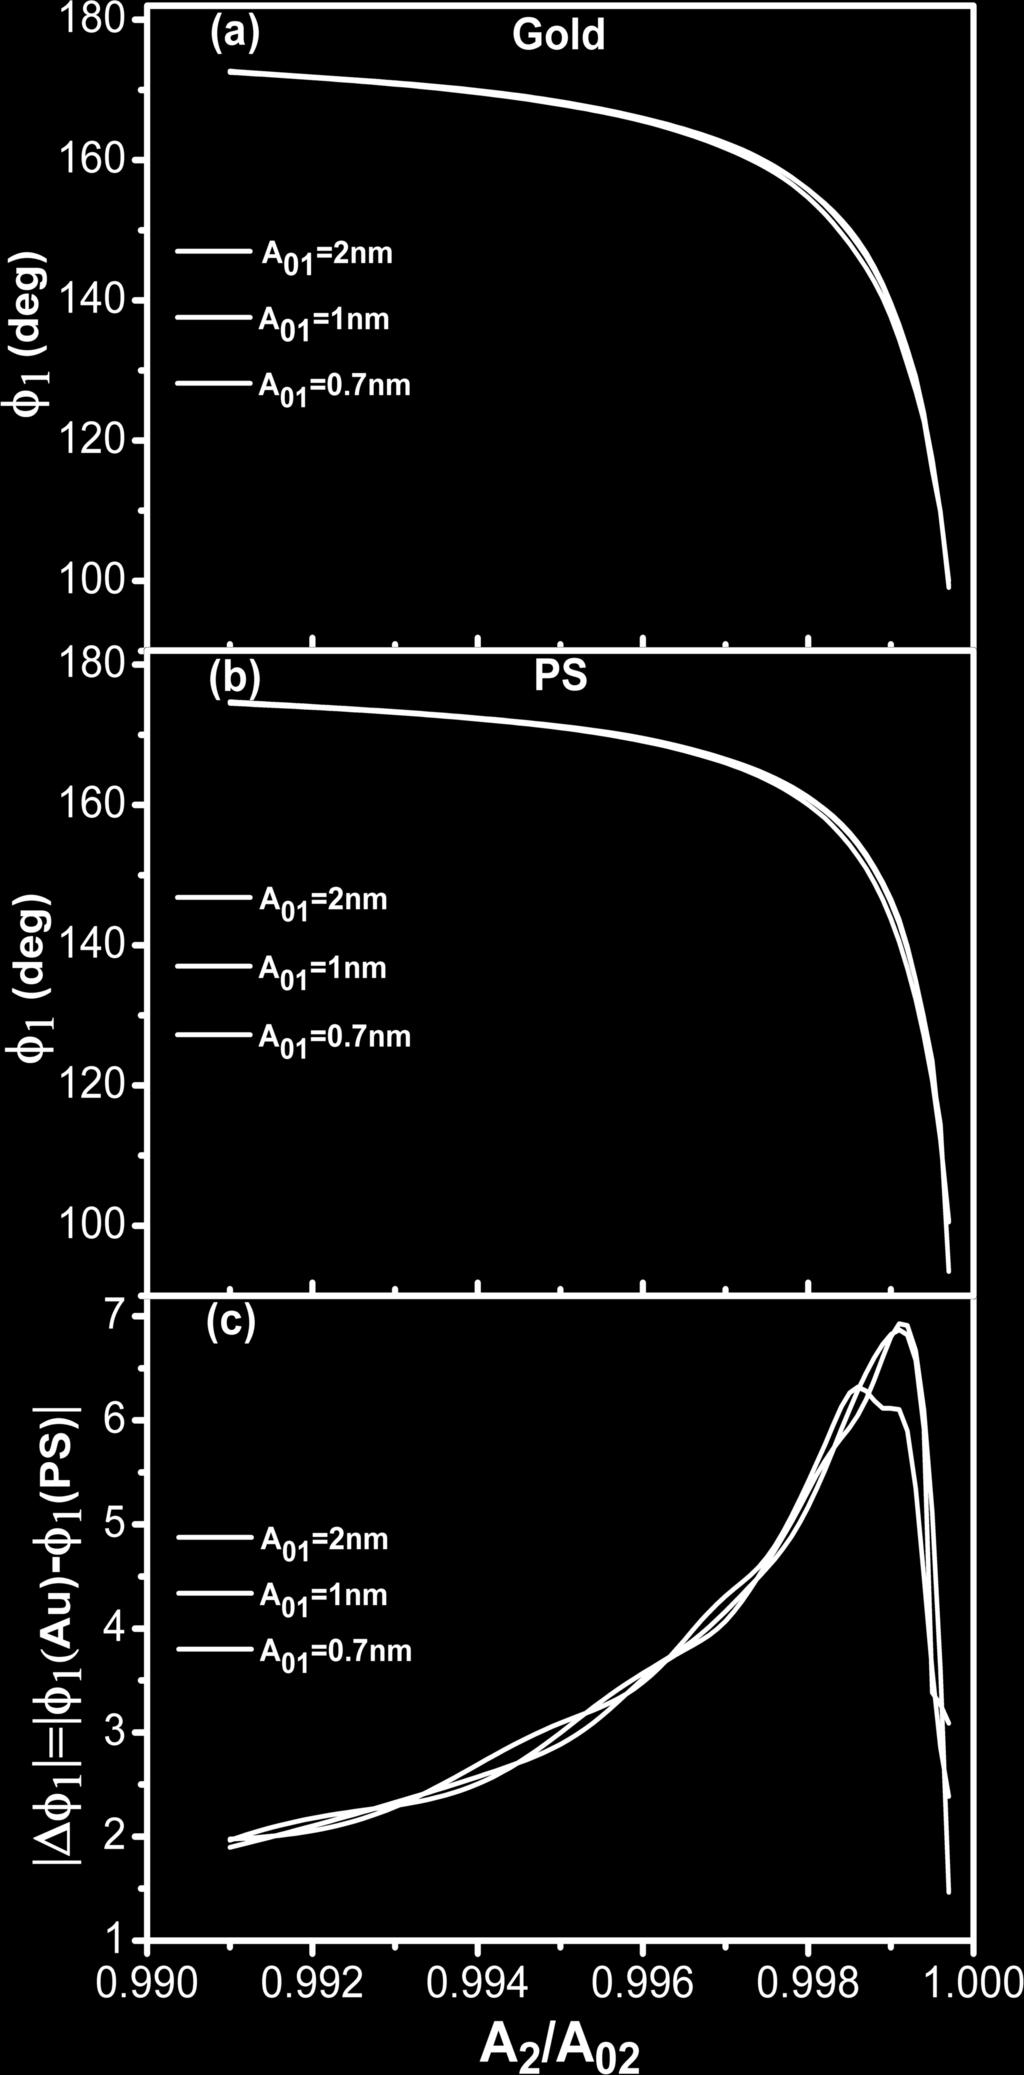 Figure 4: (a) Total dissipated power as a function of A 1 /A 01 (gold). (b) Total dissipated power as a function of A 1 /A 01 (PS).